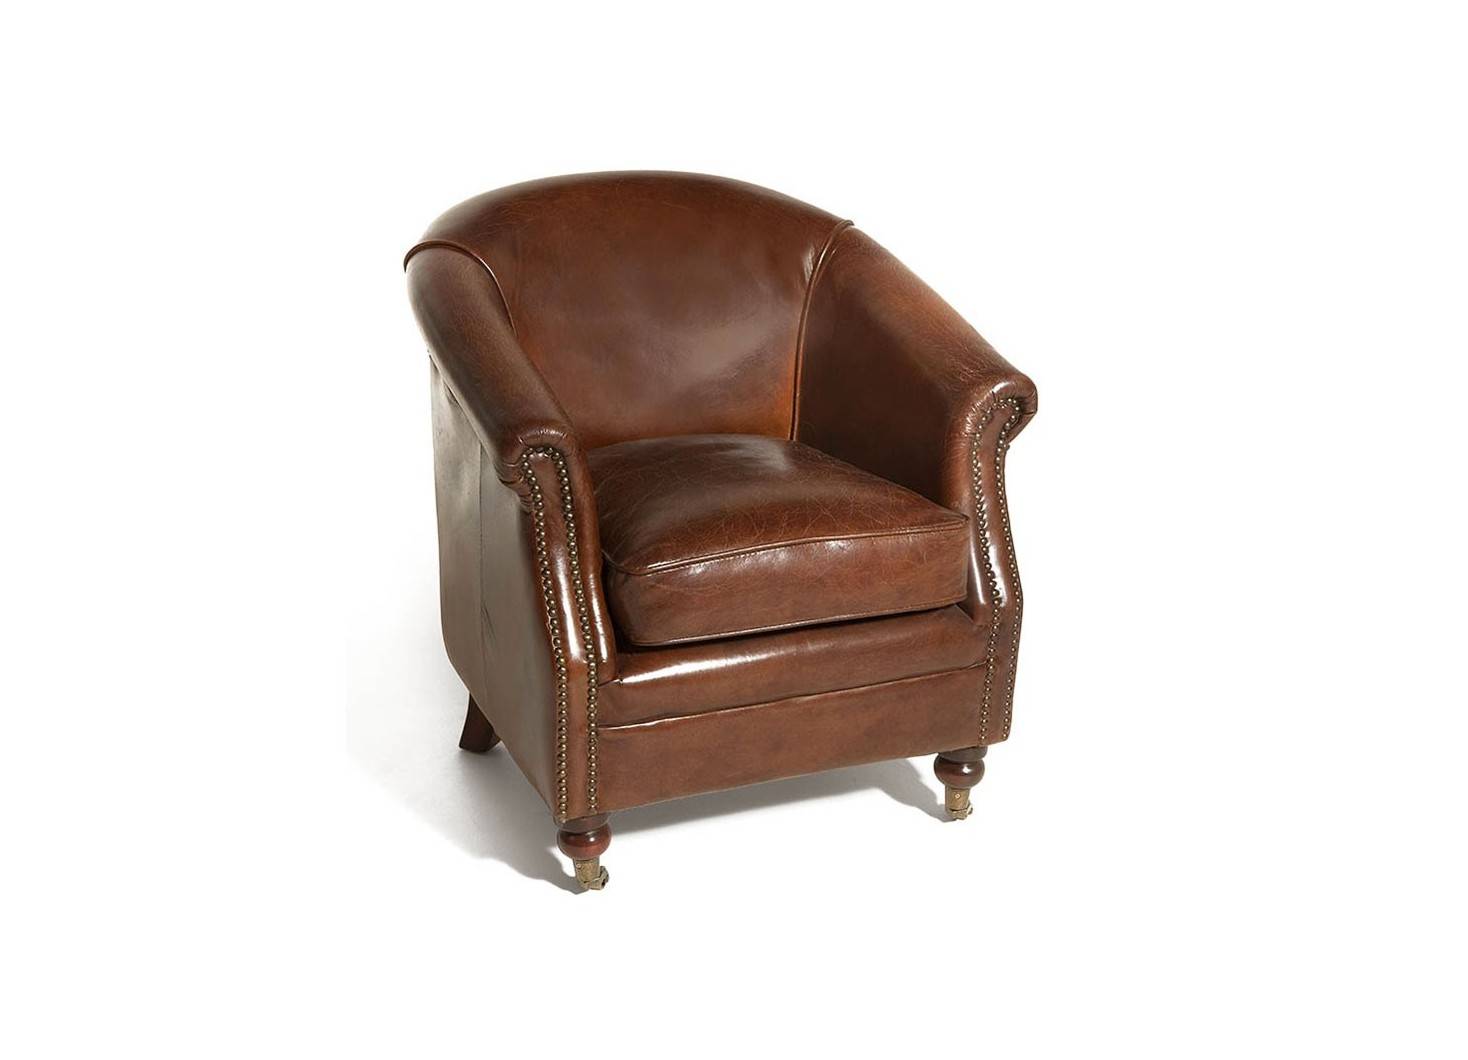 Club armchair in brown leather